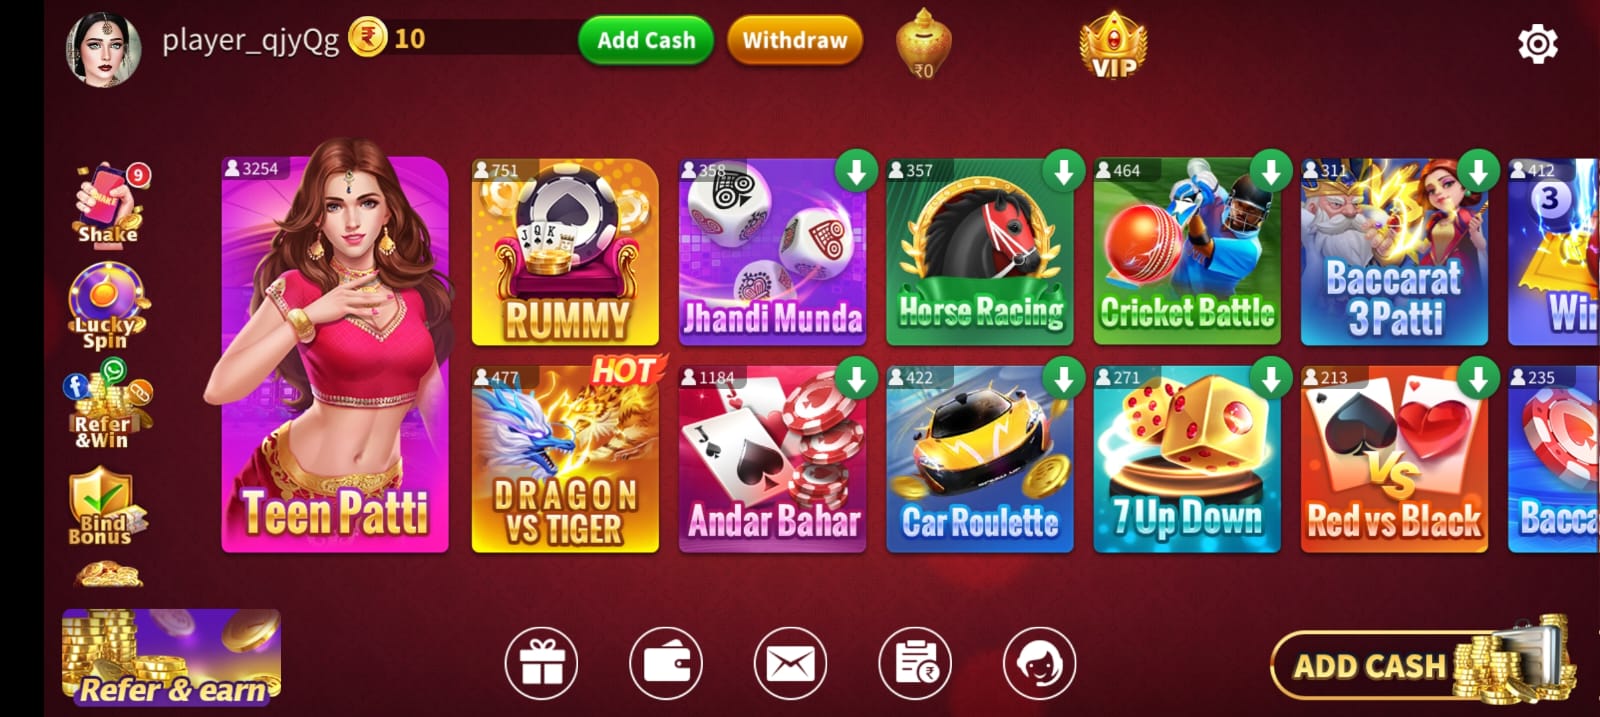 Available Games on Rummy King App